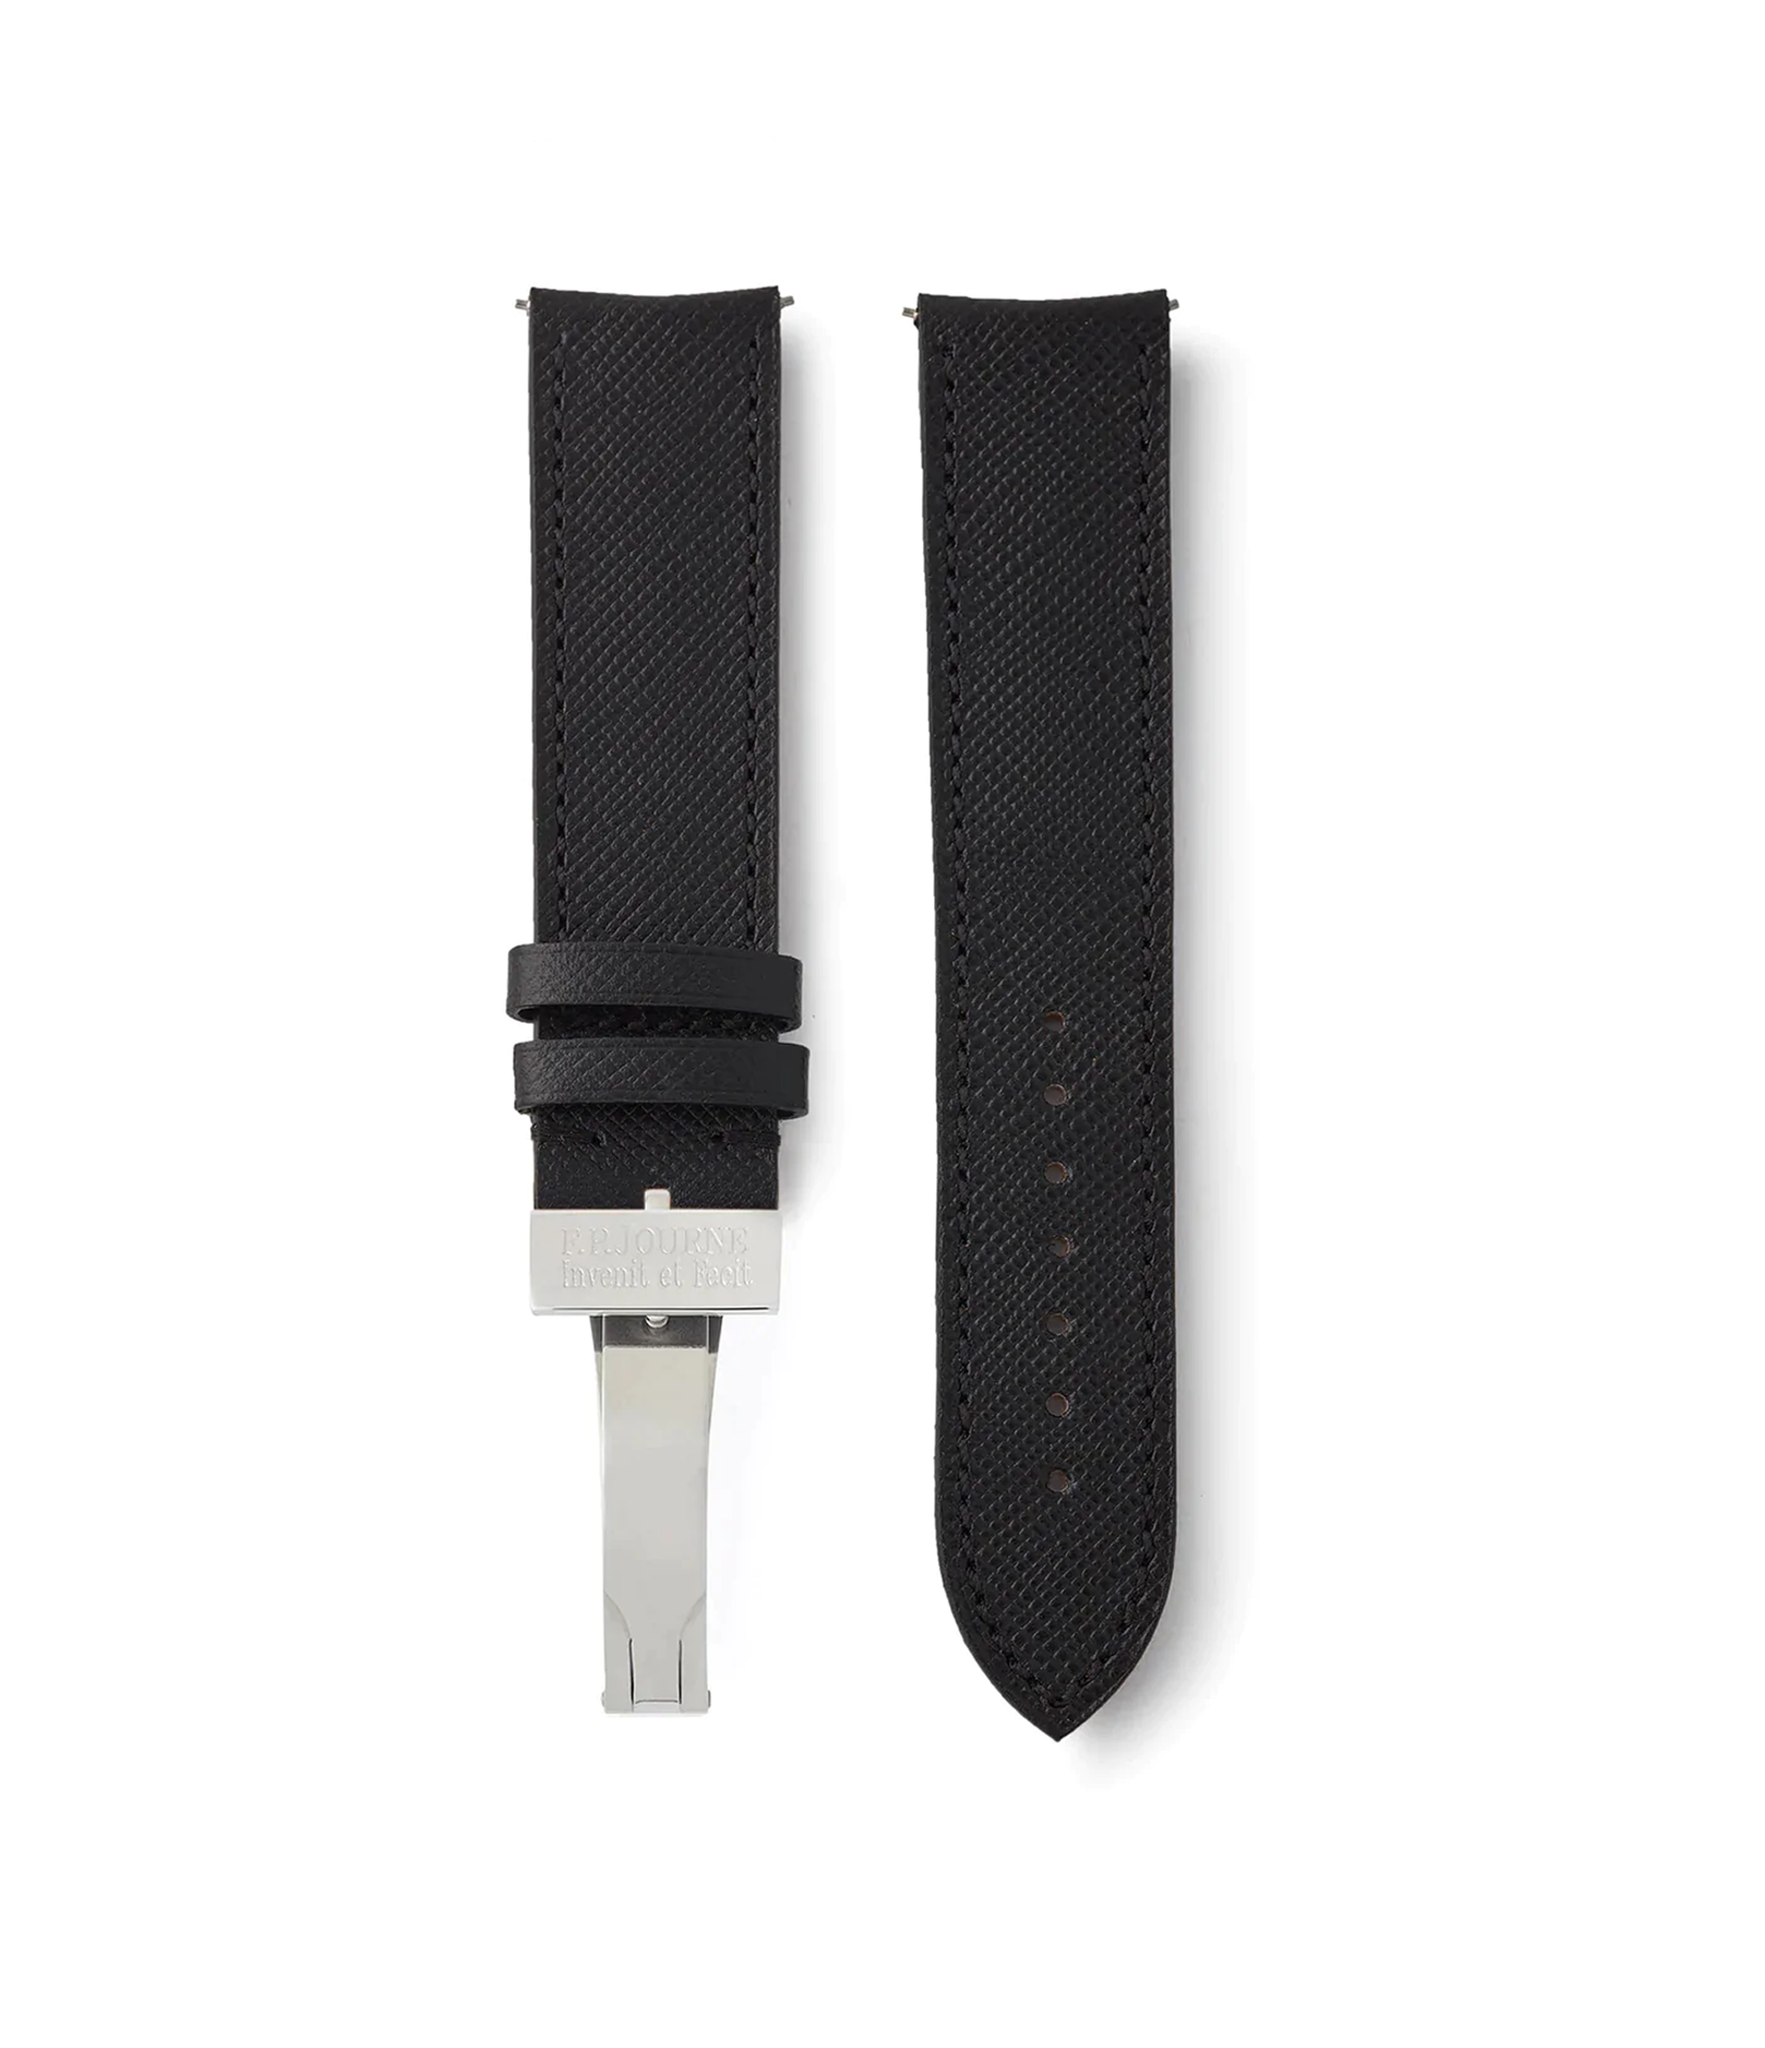 Buy saffiano quality watch strap in polished obsidian black from A Collected Man London, in short or regular lengths. We are proud to offer these hand-crafted watch straps, thoughtfully made in Europe, to suit your watch. Available to order online for worldwide delivery.